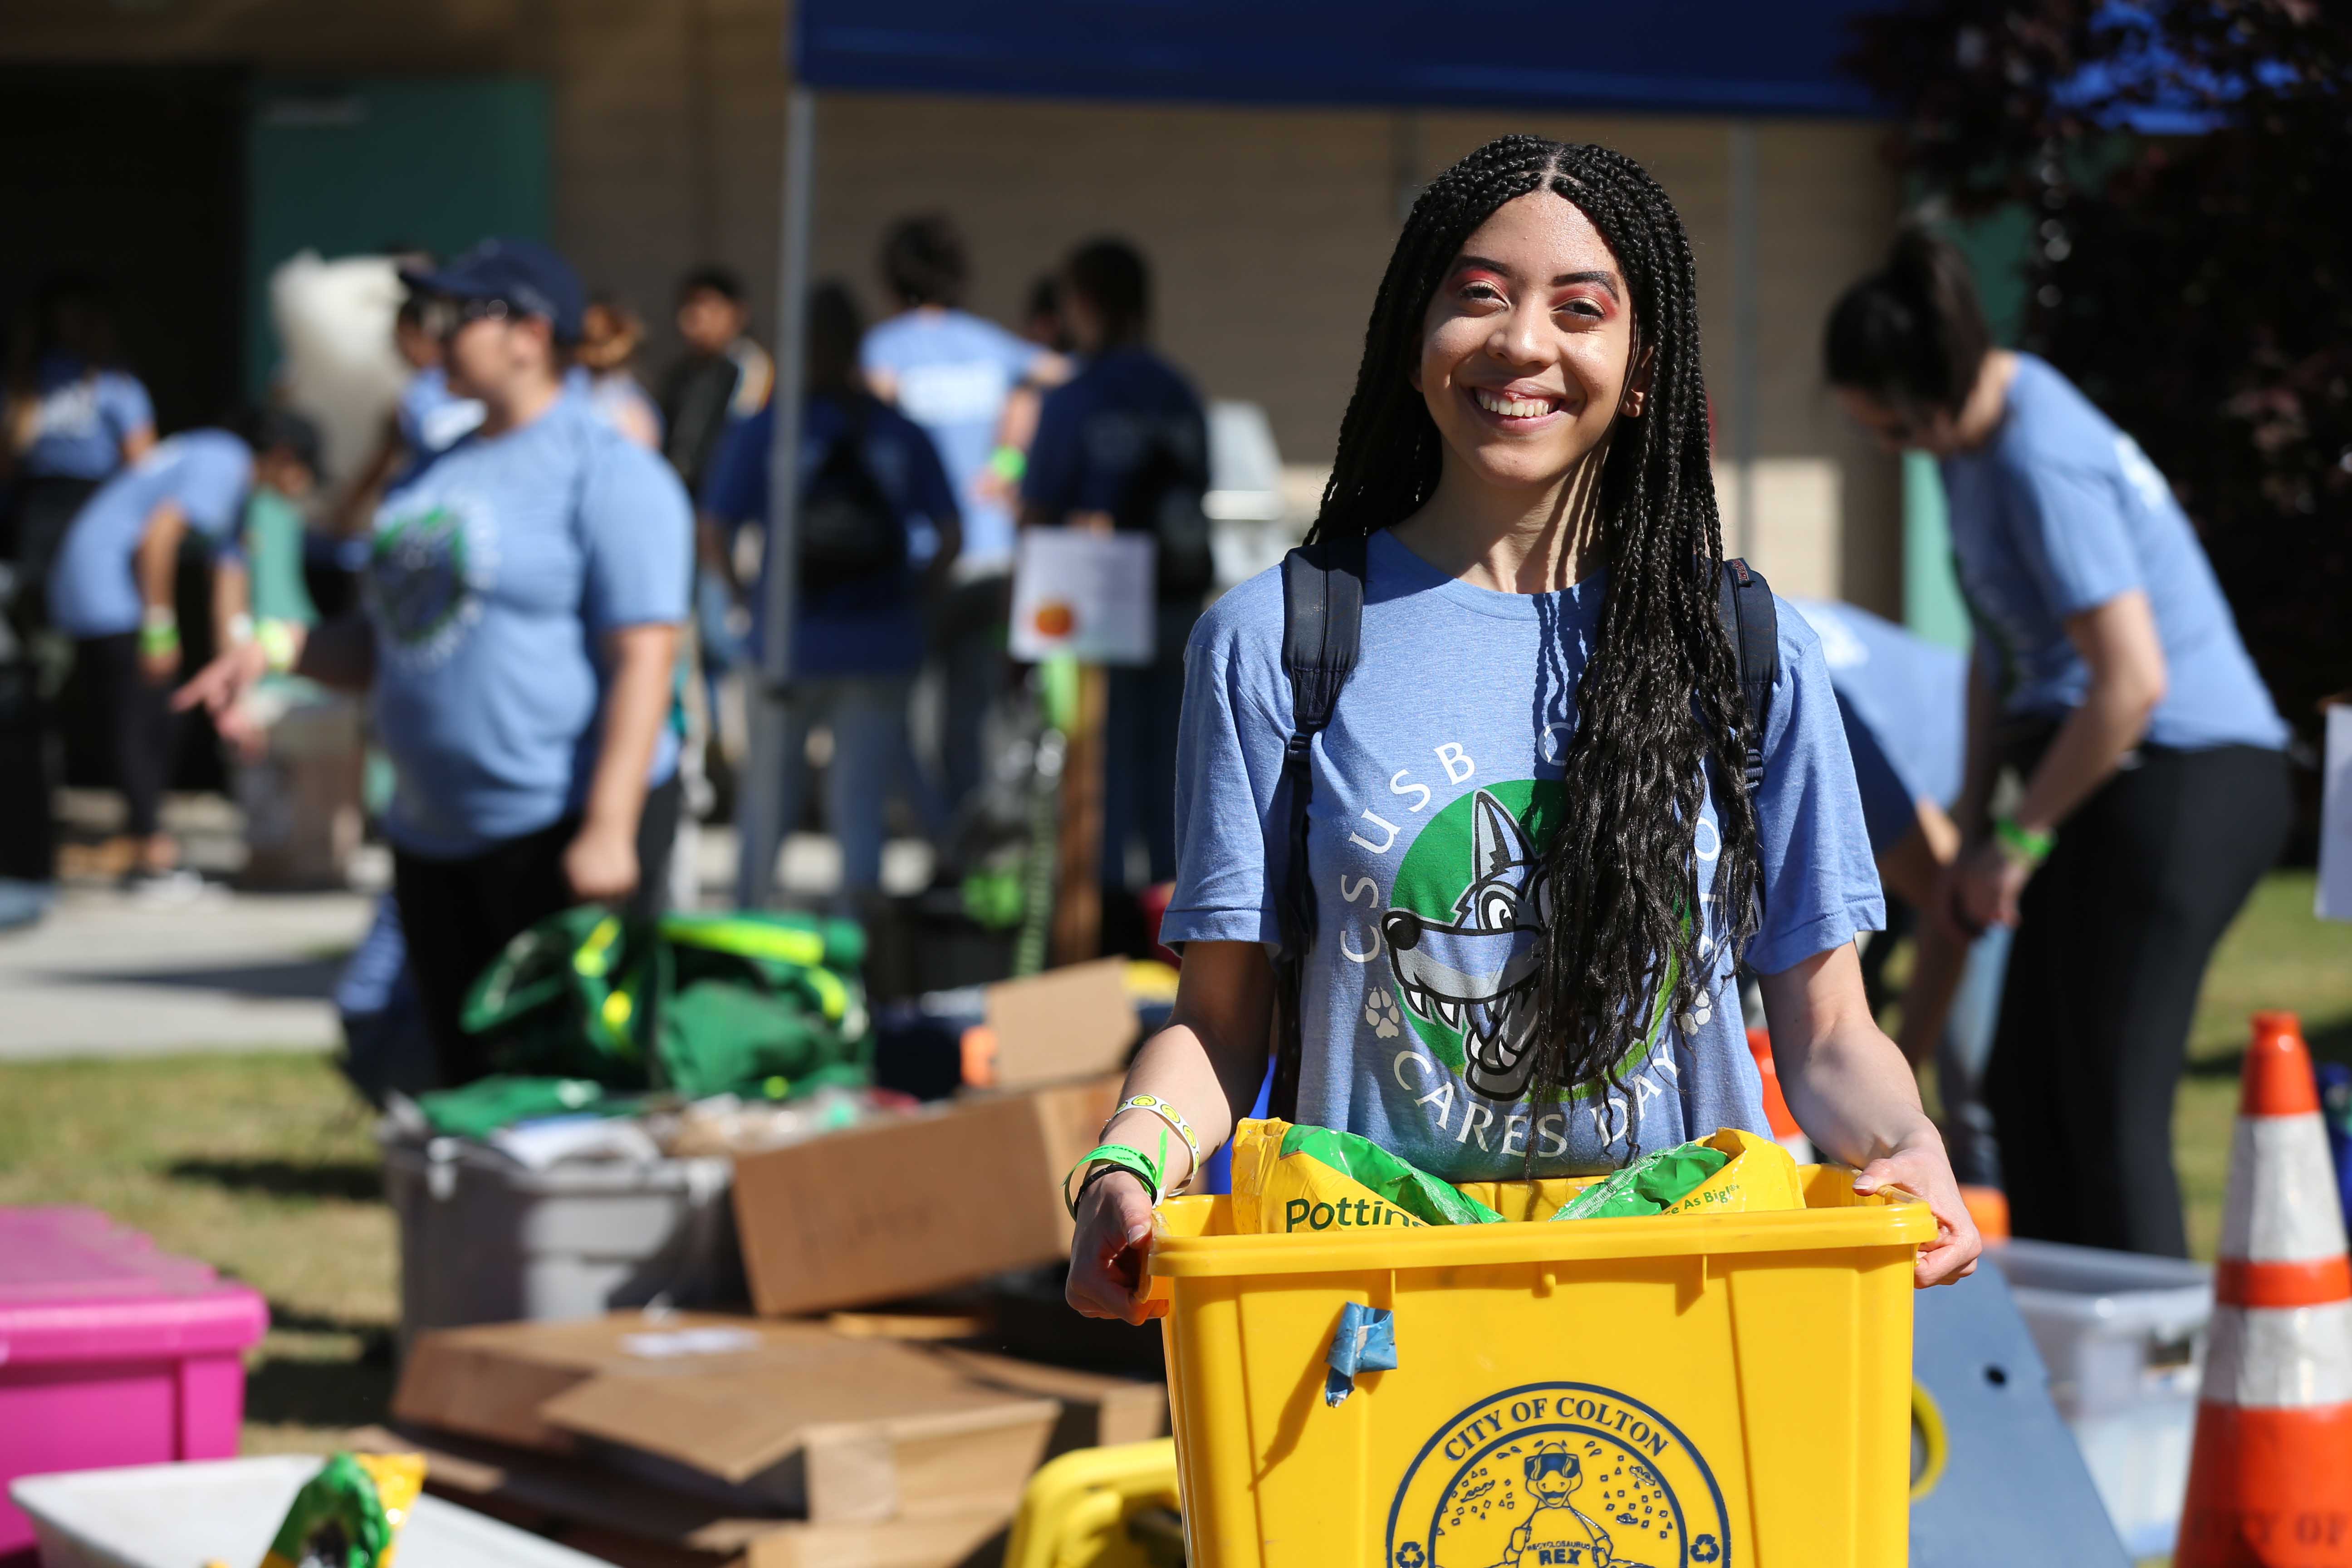 More than 420 Cal State San Bernardino students, alumni, staff and faculty joined forces as volunteers on and off campus to help local nonprofit organizations and community agencies as part of the seventh annual Coyote Cares Day 